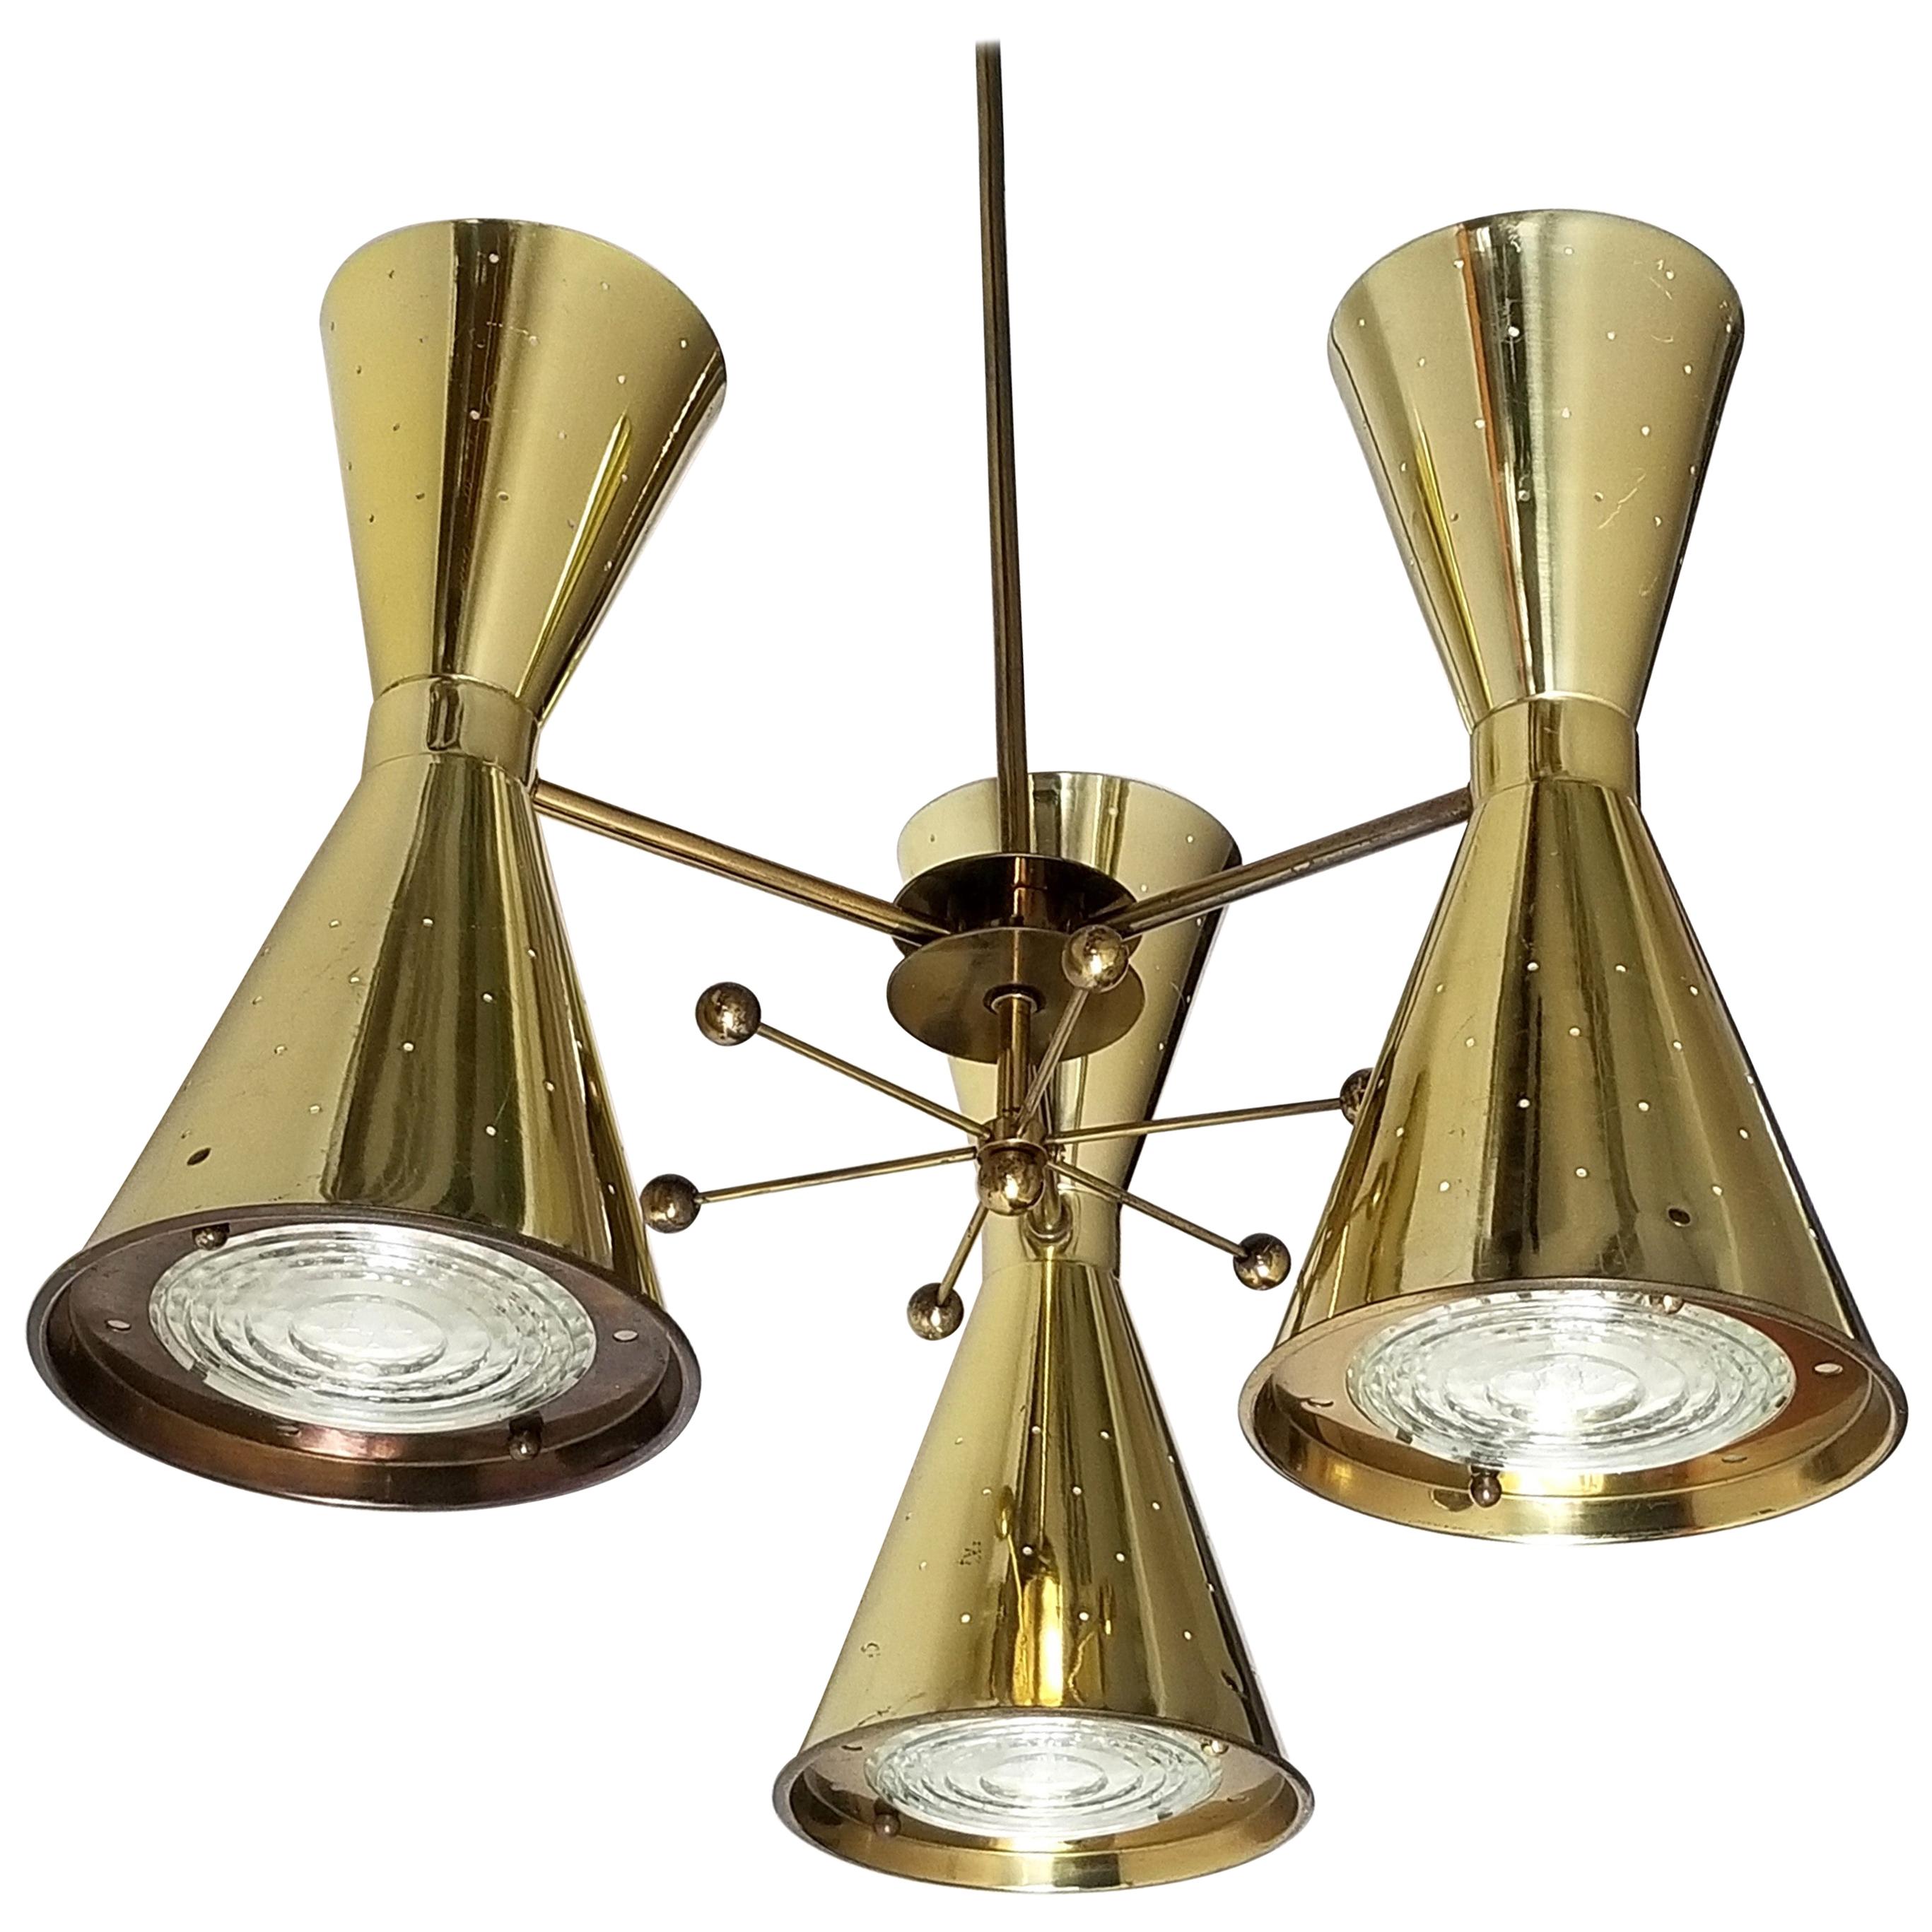 1950s Diabolo, Hourglass Pierced Brass-Plated Chandelier with Glass Lens